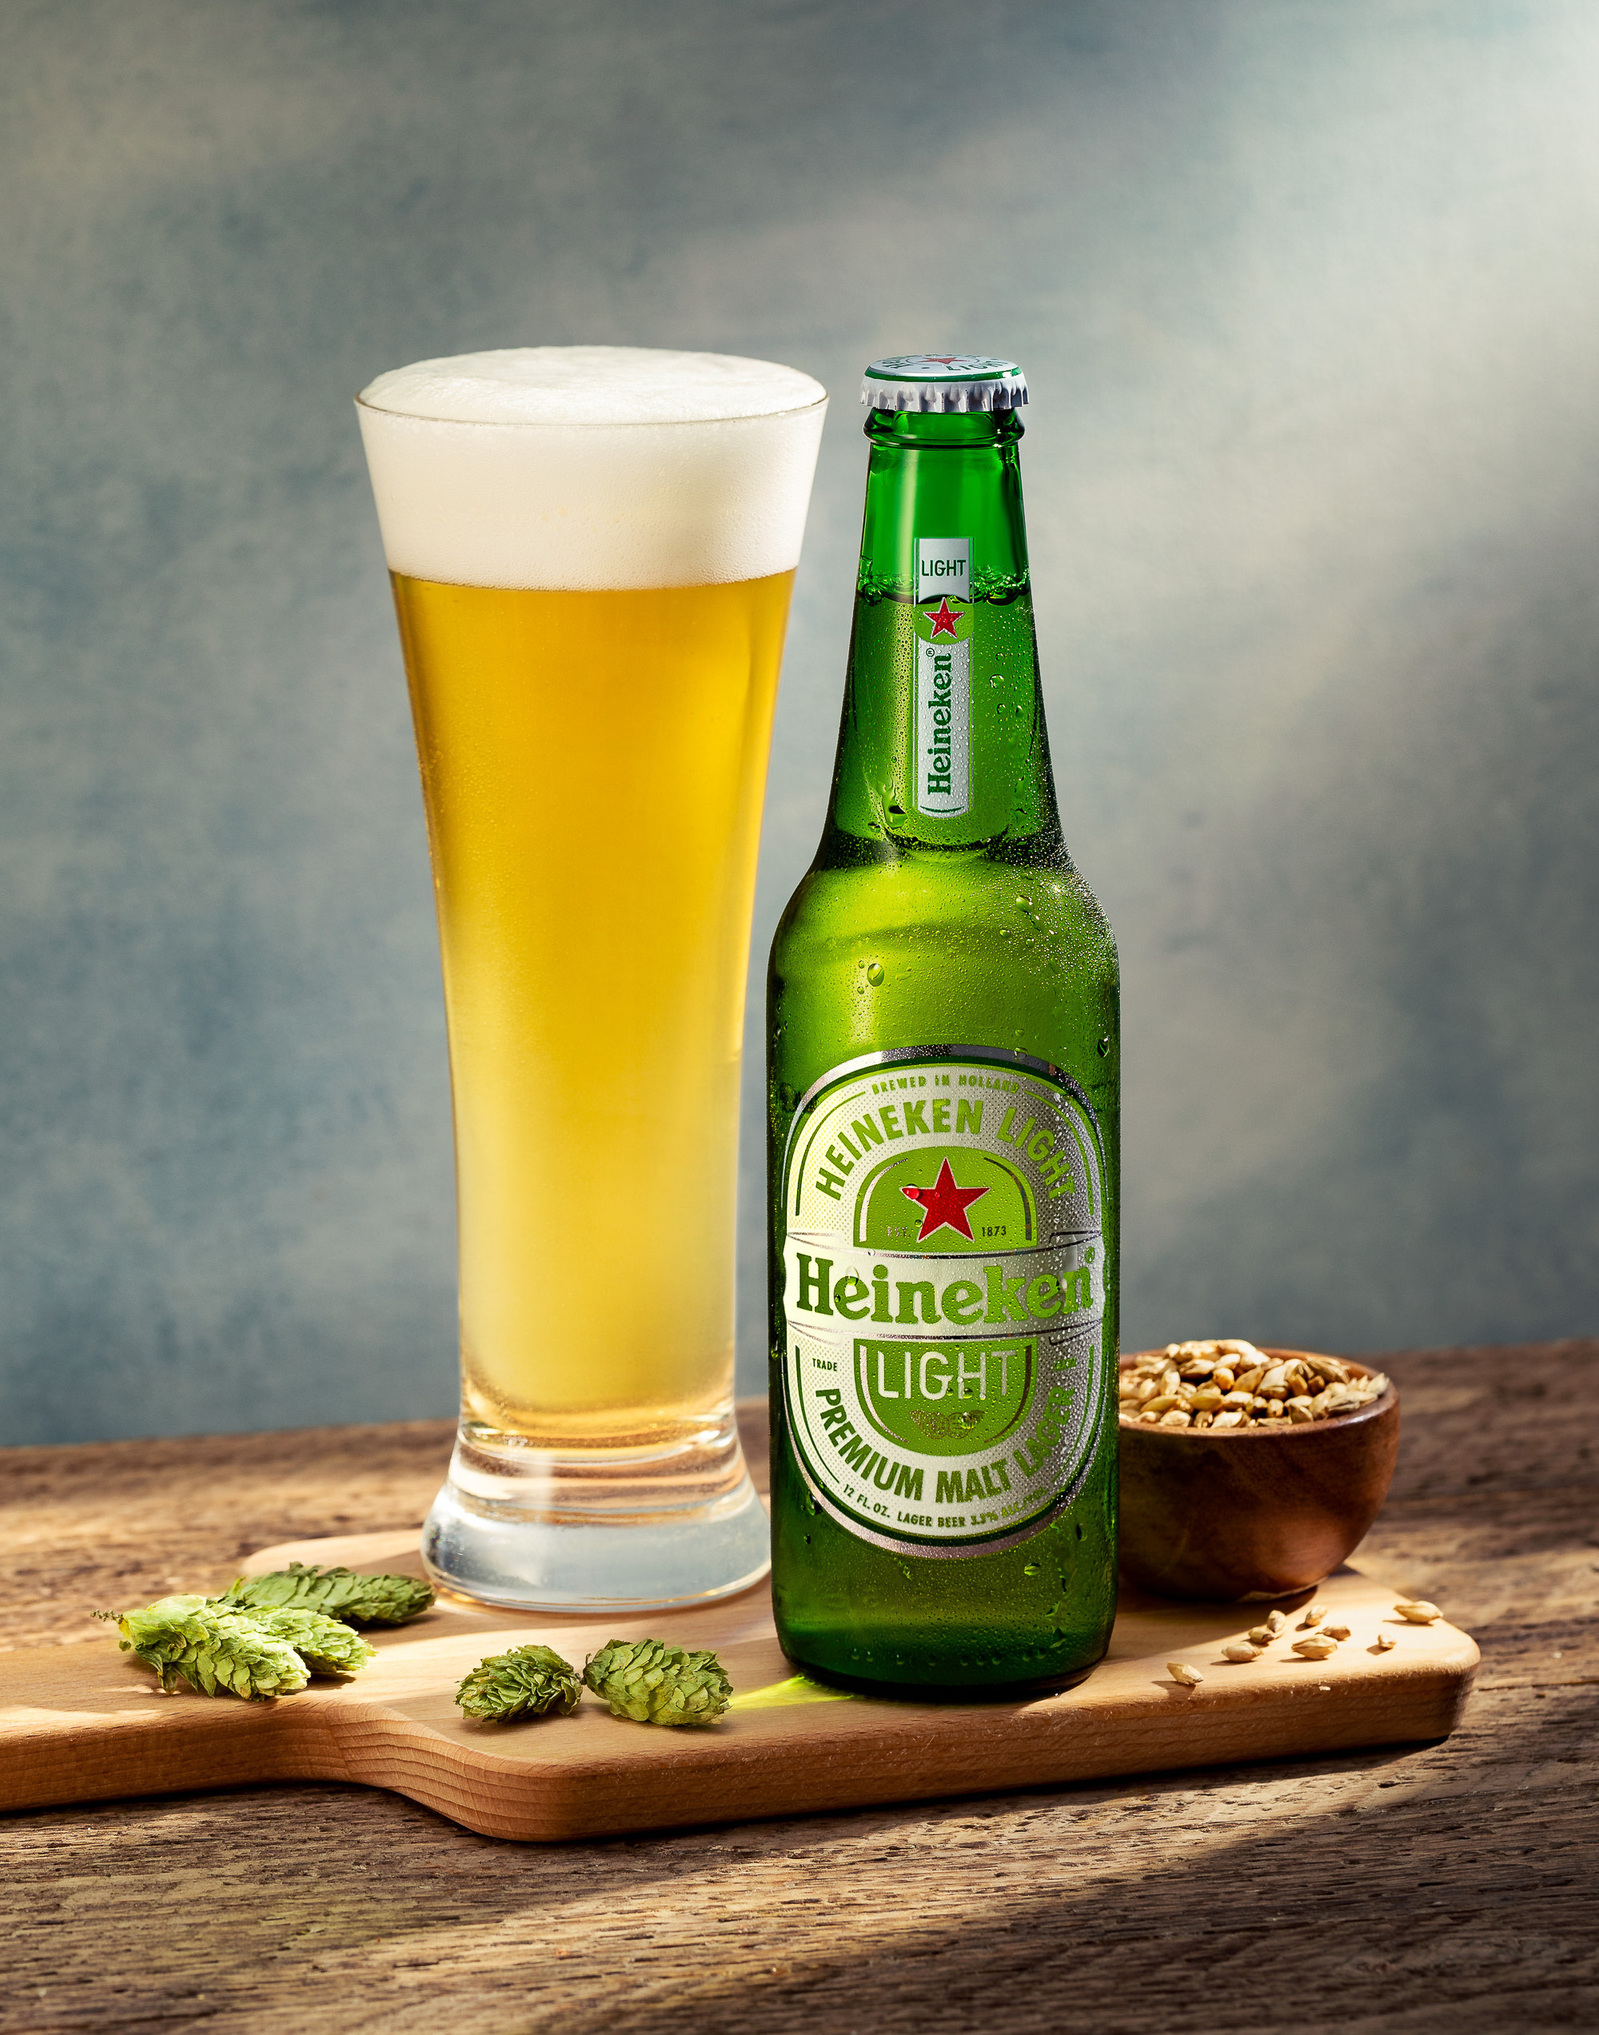 Beer, beverage and liquor product photography by commercial and advertising photographer Timothy Hogan in Los Angeles